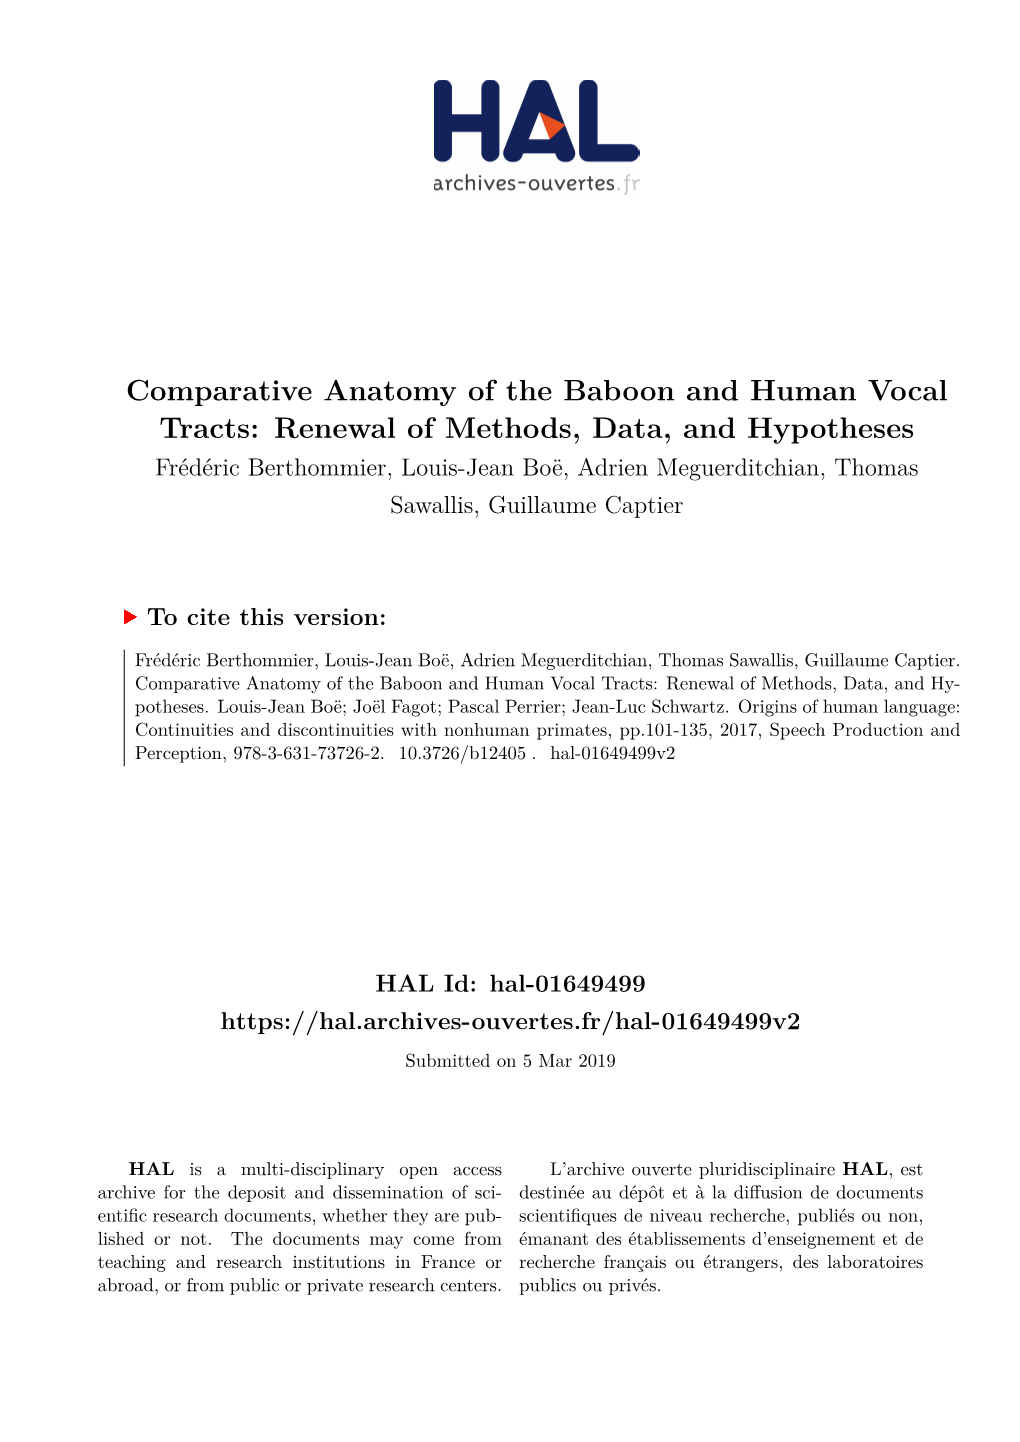 Comparative Anatomy of the Baboon and Human